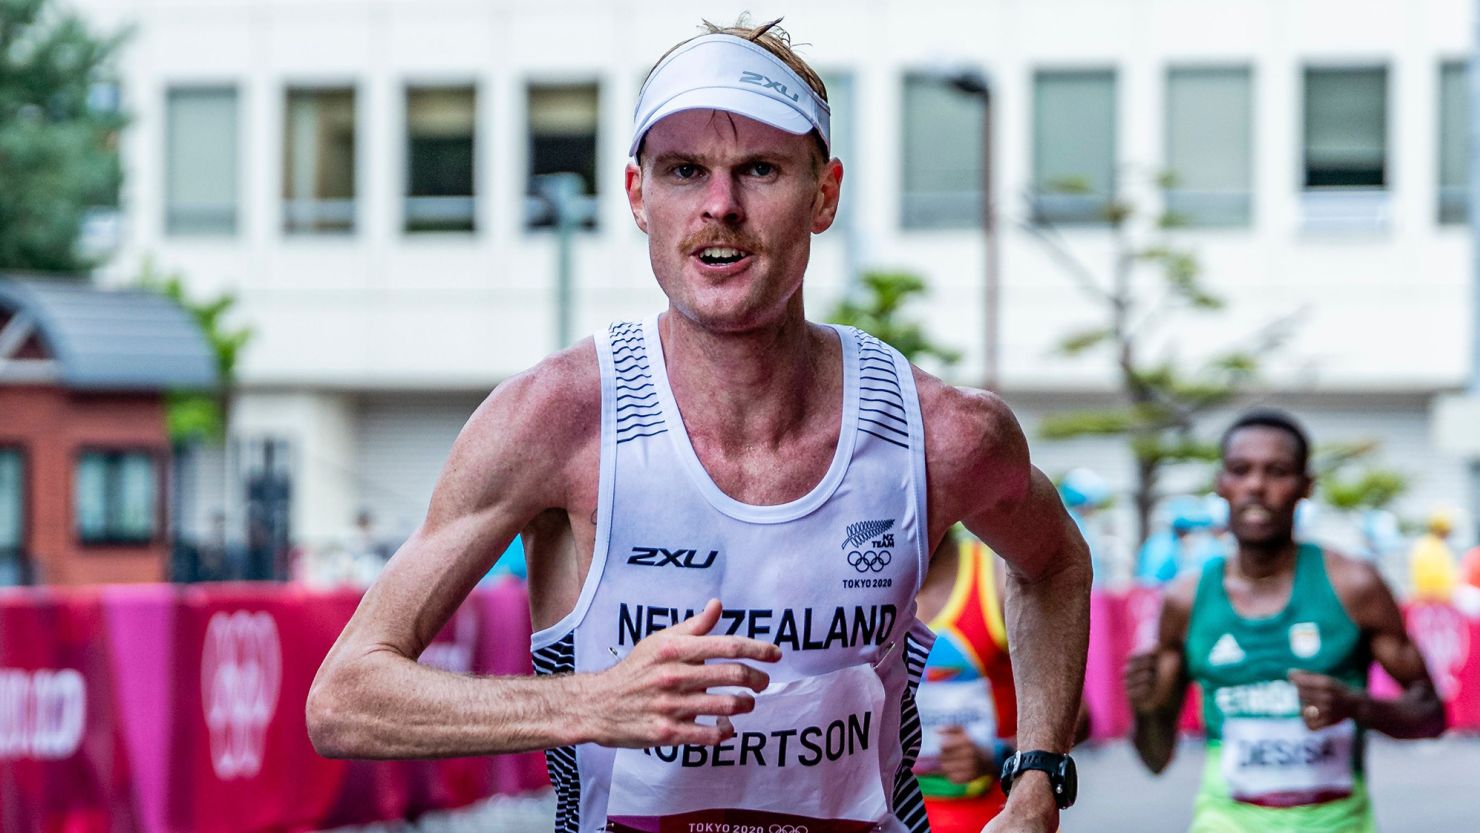 Zane Robertson Faces Eight-Year Ban for Doping Violations